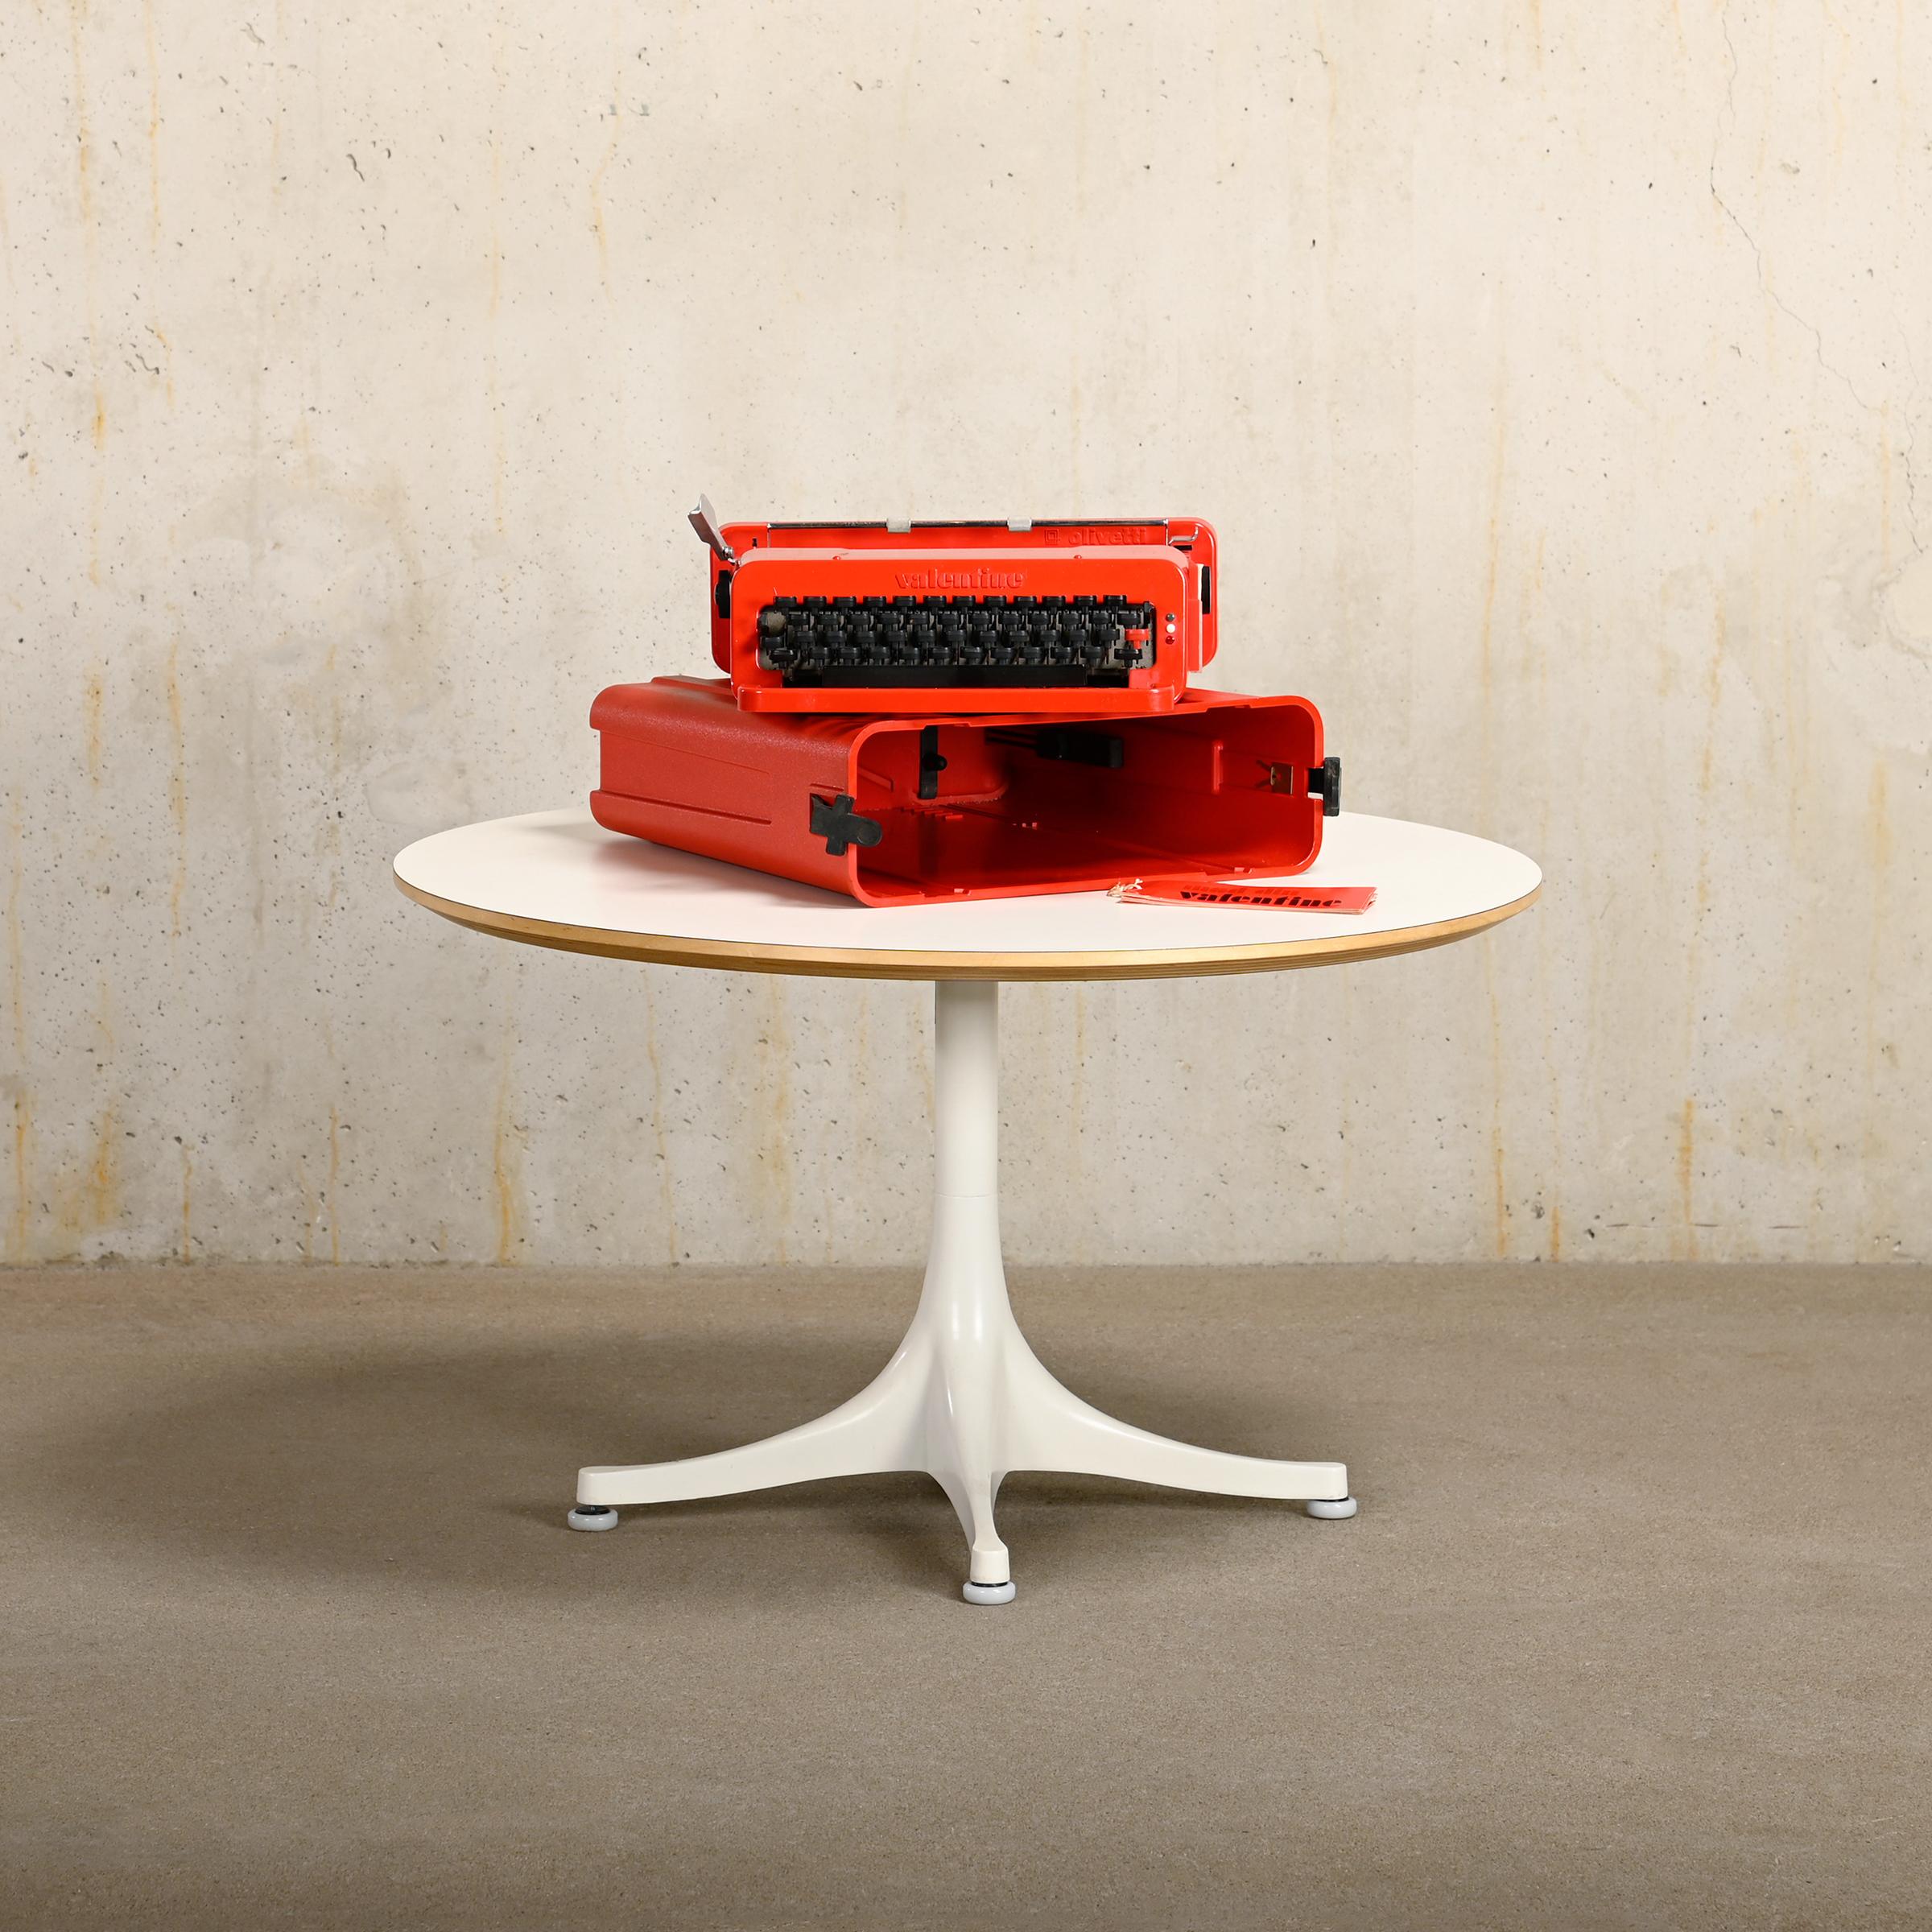 Iconic Valentine typewriter designed by Ettore Sottsass and Peter King for Olivetti. The typewriter is included in the permanent collection of the MoMa as an excellent example of industrial design. Good original and in working condition with minimal